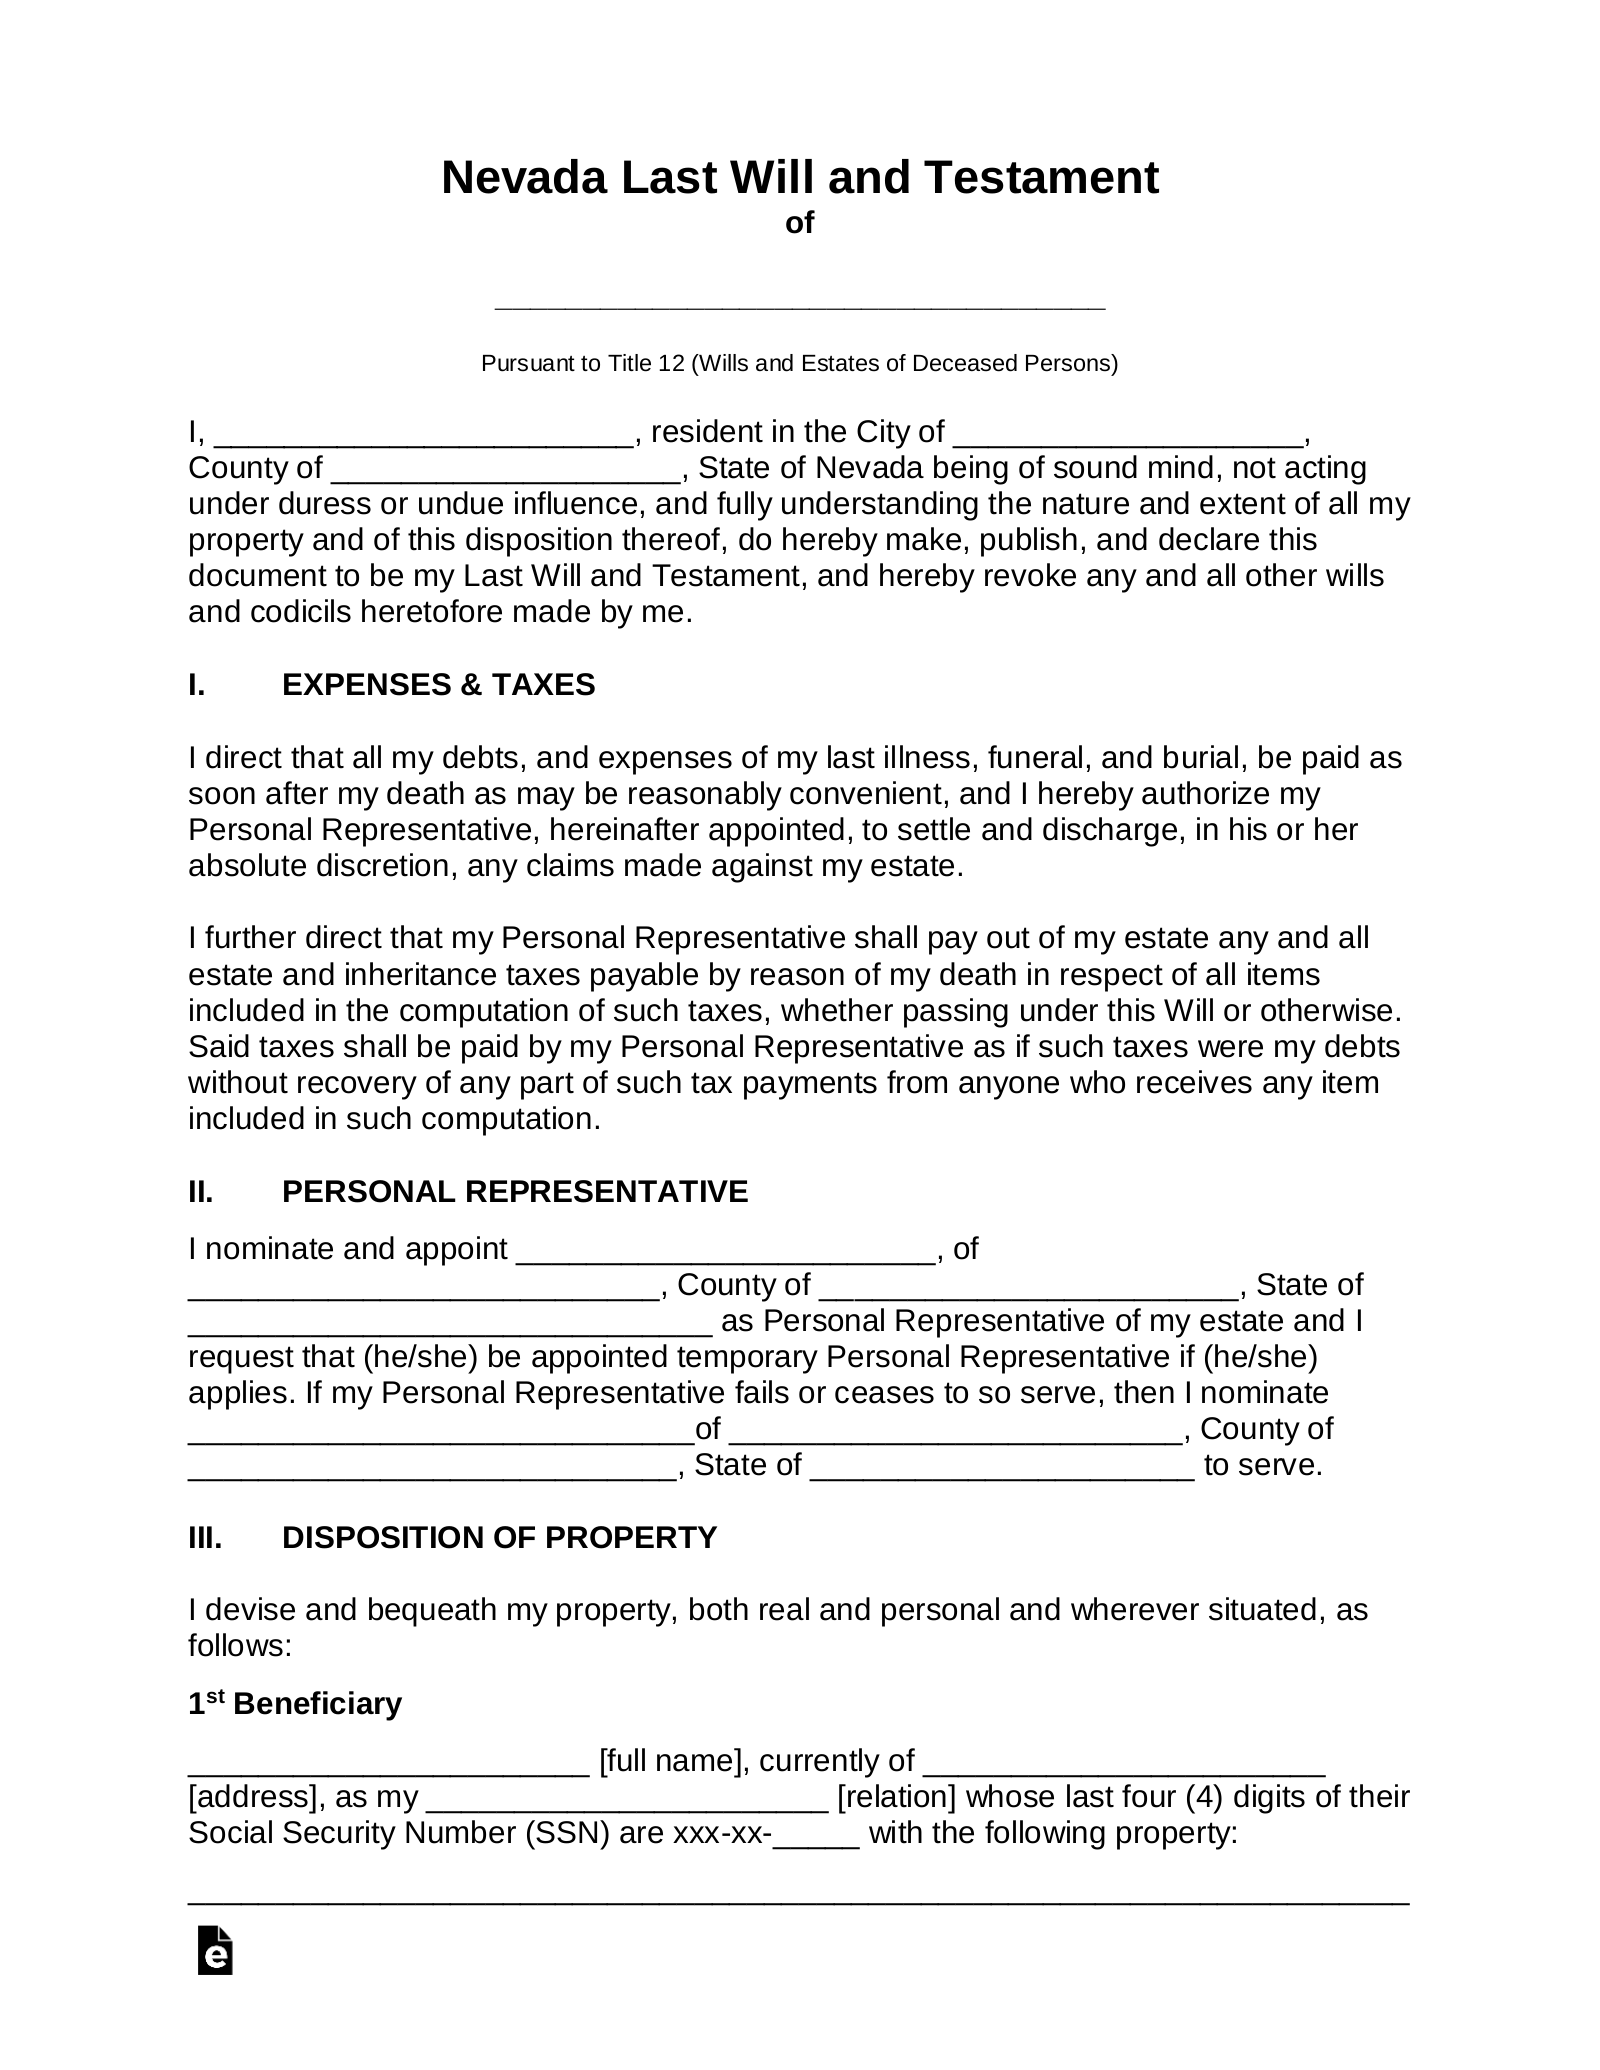 Nevada Last Will and Testament Template